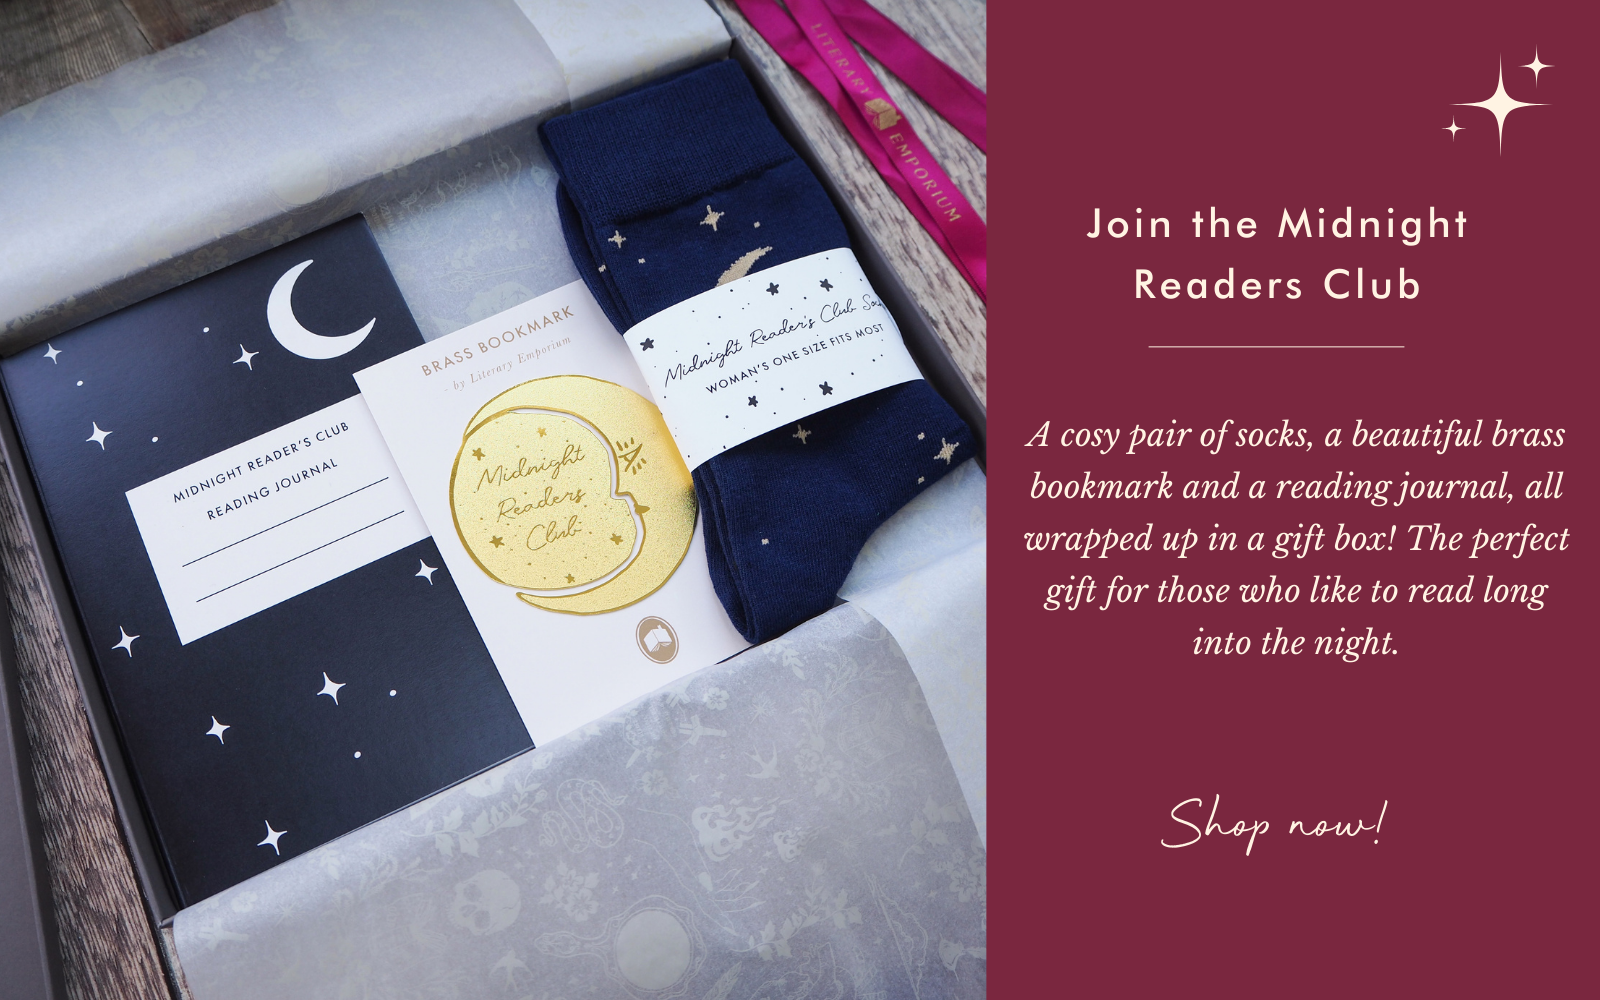 Midnight Readers Club - A gift box for book lovers containing socks, brass bookmark and reading journal